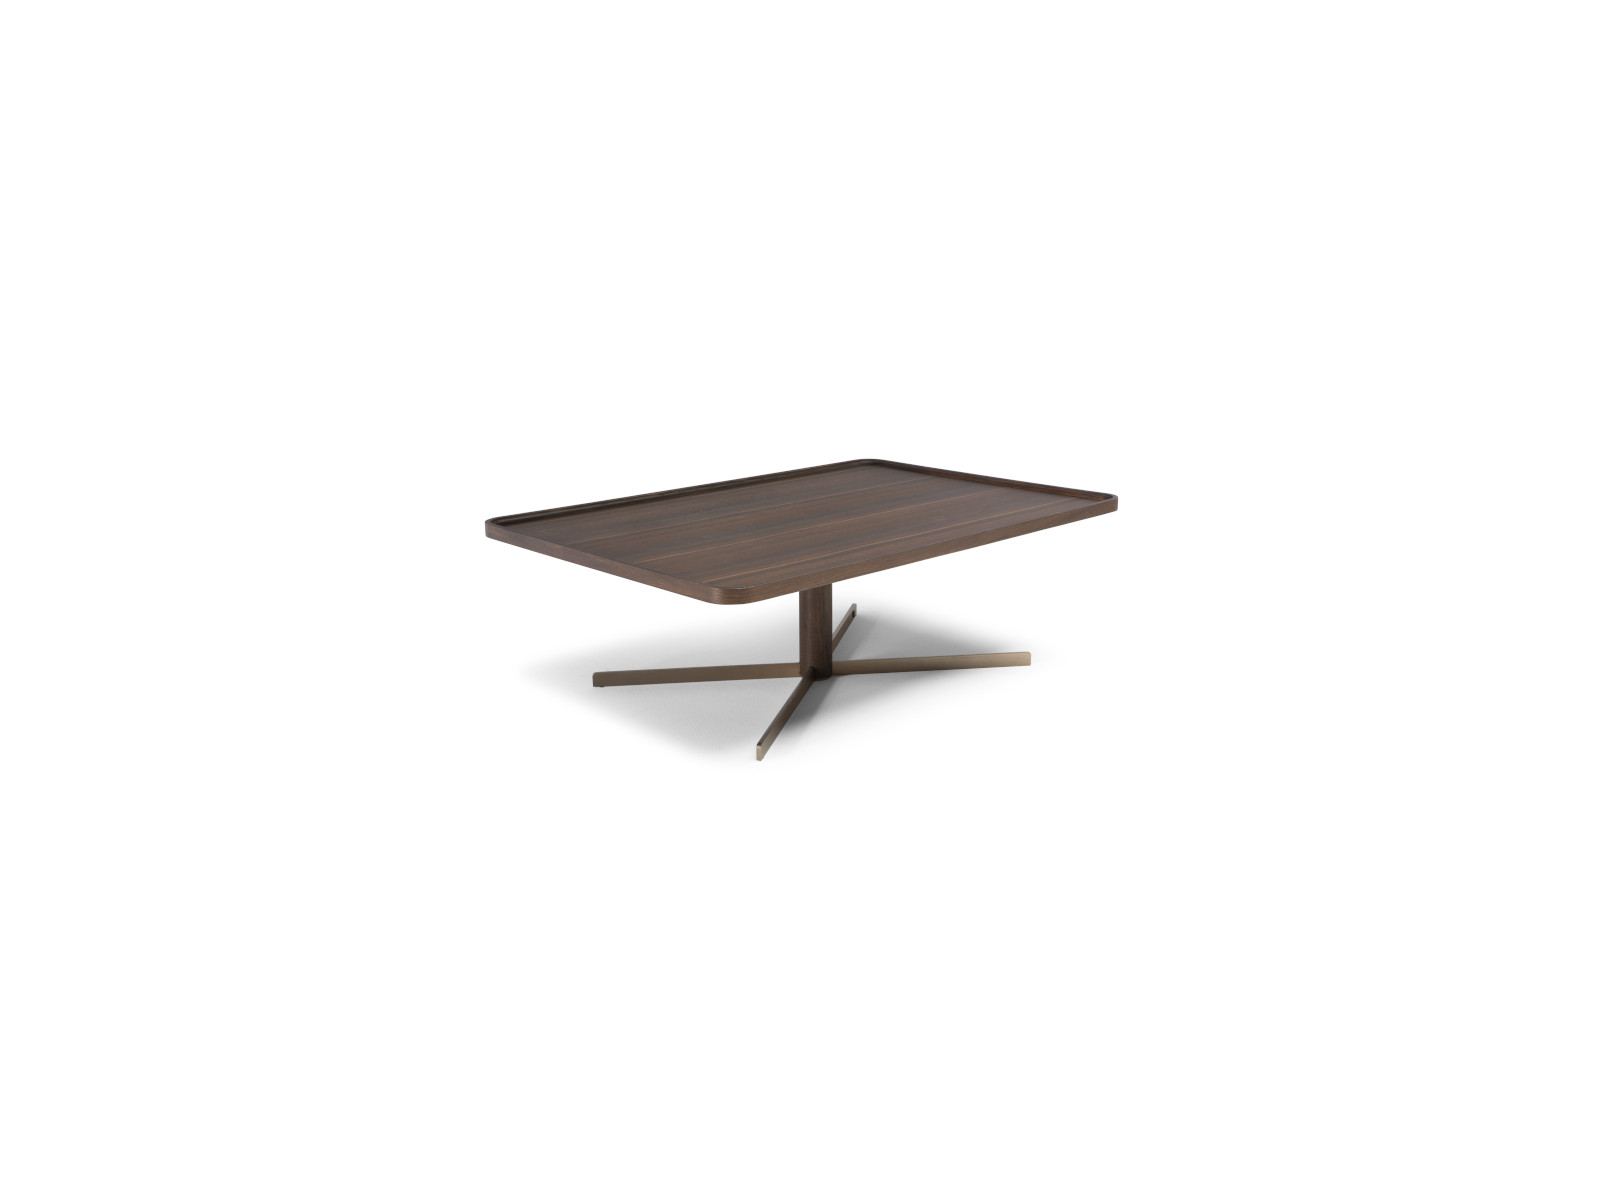 Preset default image - ICON Central coffee table